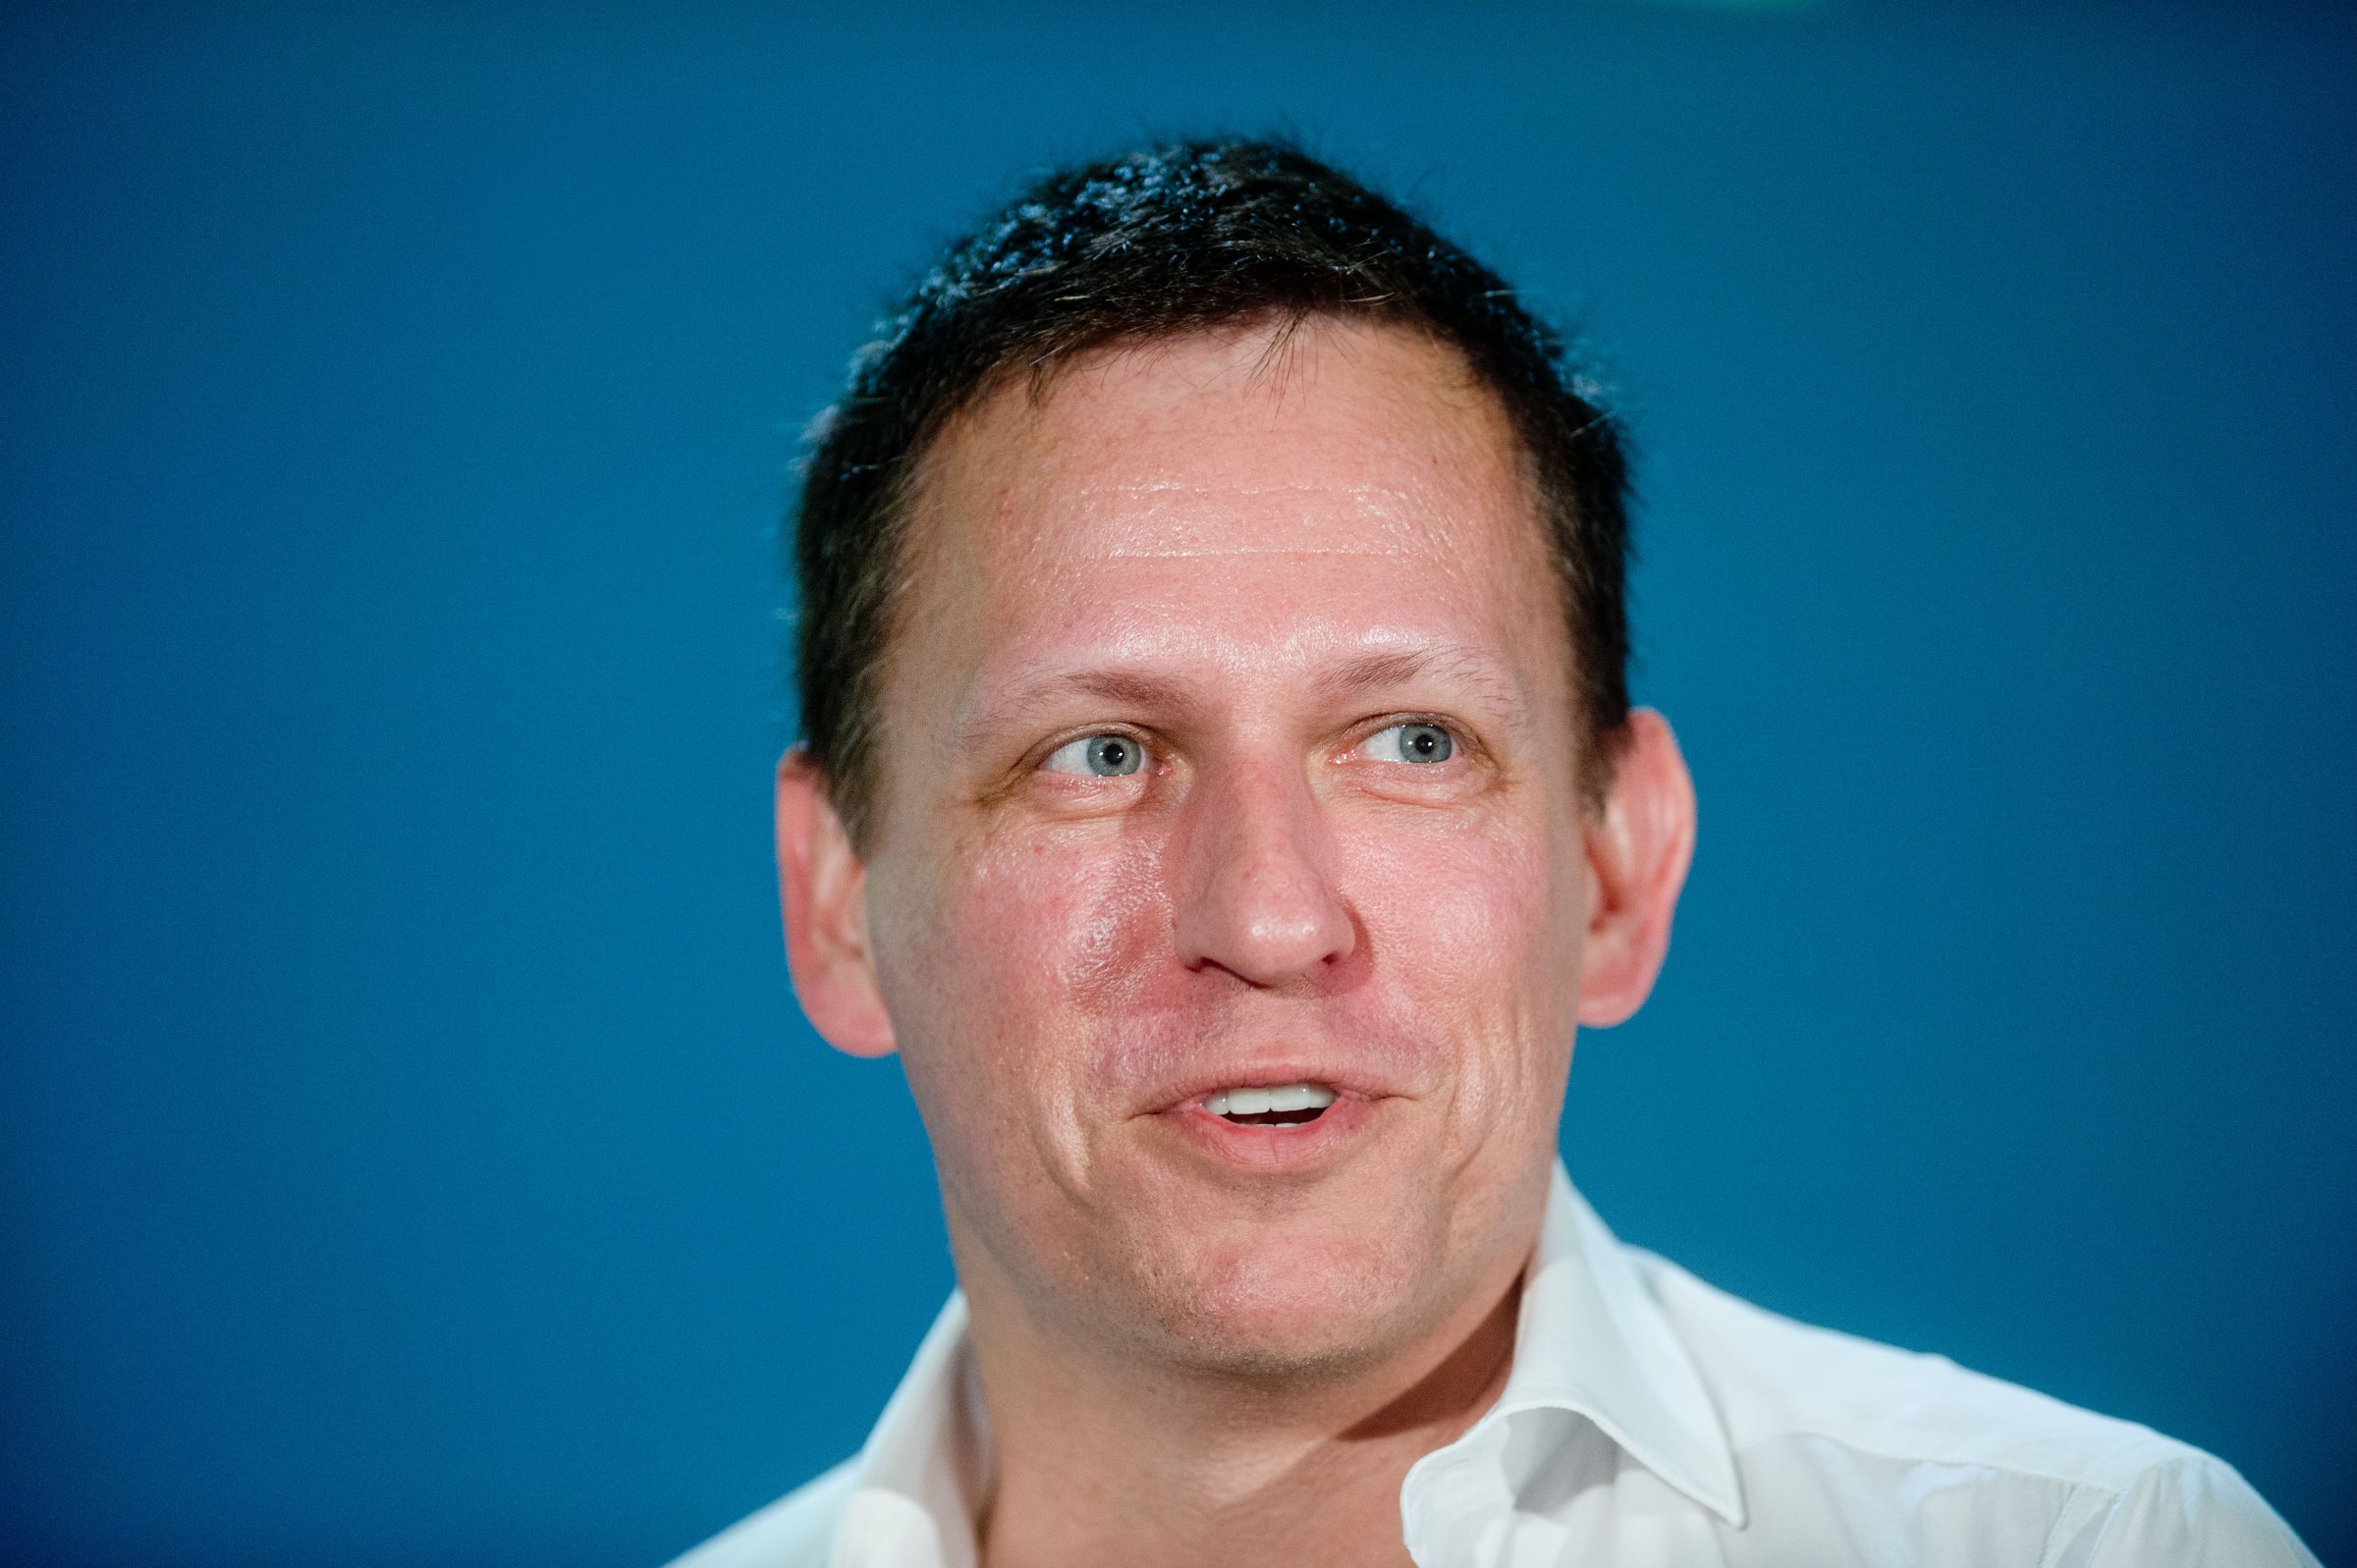 Peter Thiel, founding investor in PayPal Inc. and Facebook Inc., speaks during the LendIt USA 2016 conference in San Francisco, April 12, 2016.